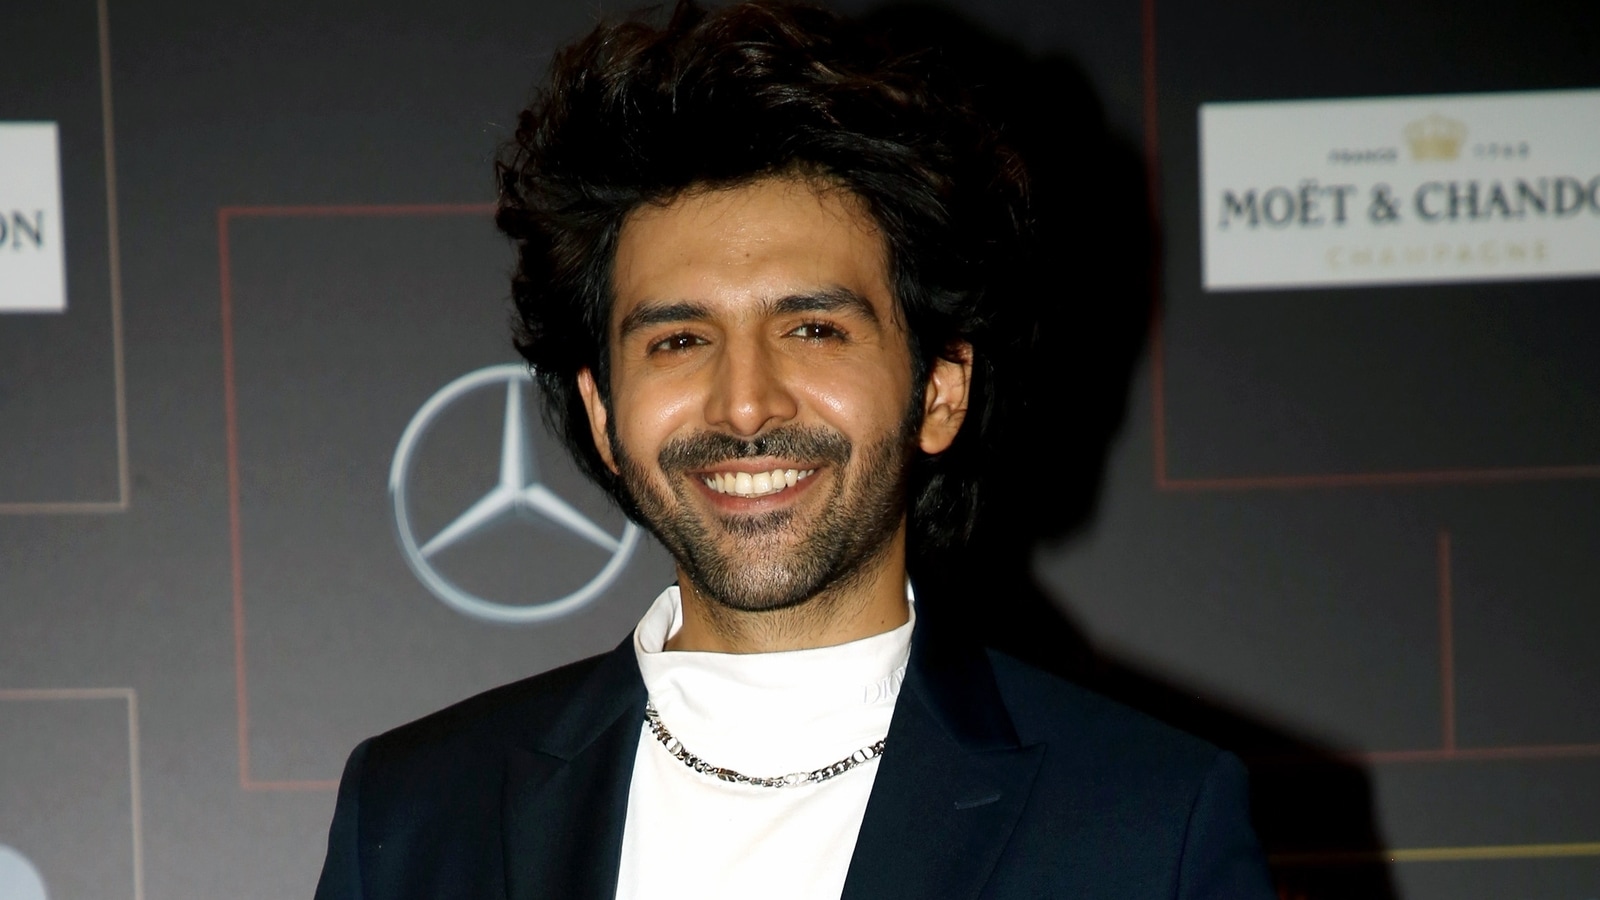 Kartik Aaryan reacts to reports about hiking fees post Bhool Bhulaiyaa 2 success with a hilarious tweet